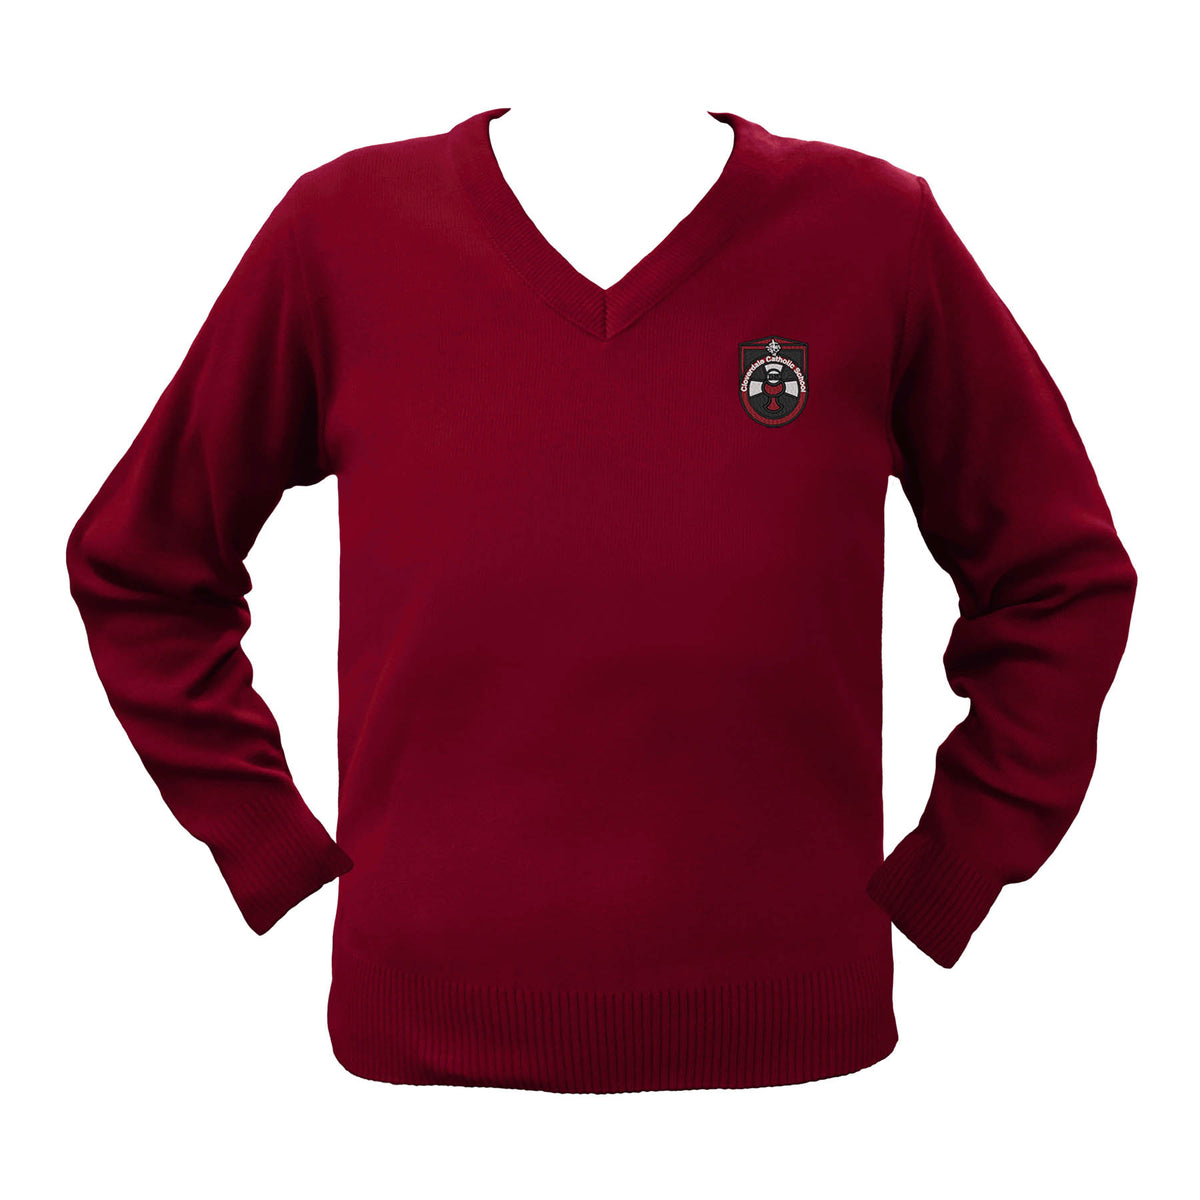 CLOVERDALE CATHOLIC SCHOOL PULLOVER, UP TO SIZE 32